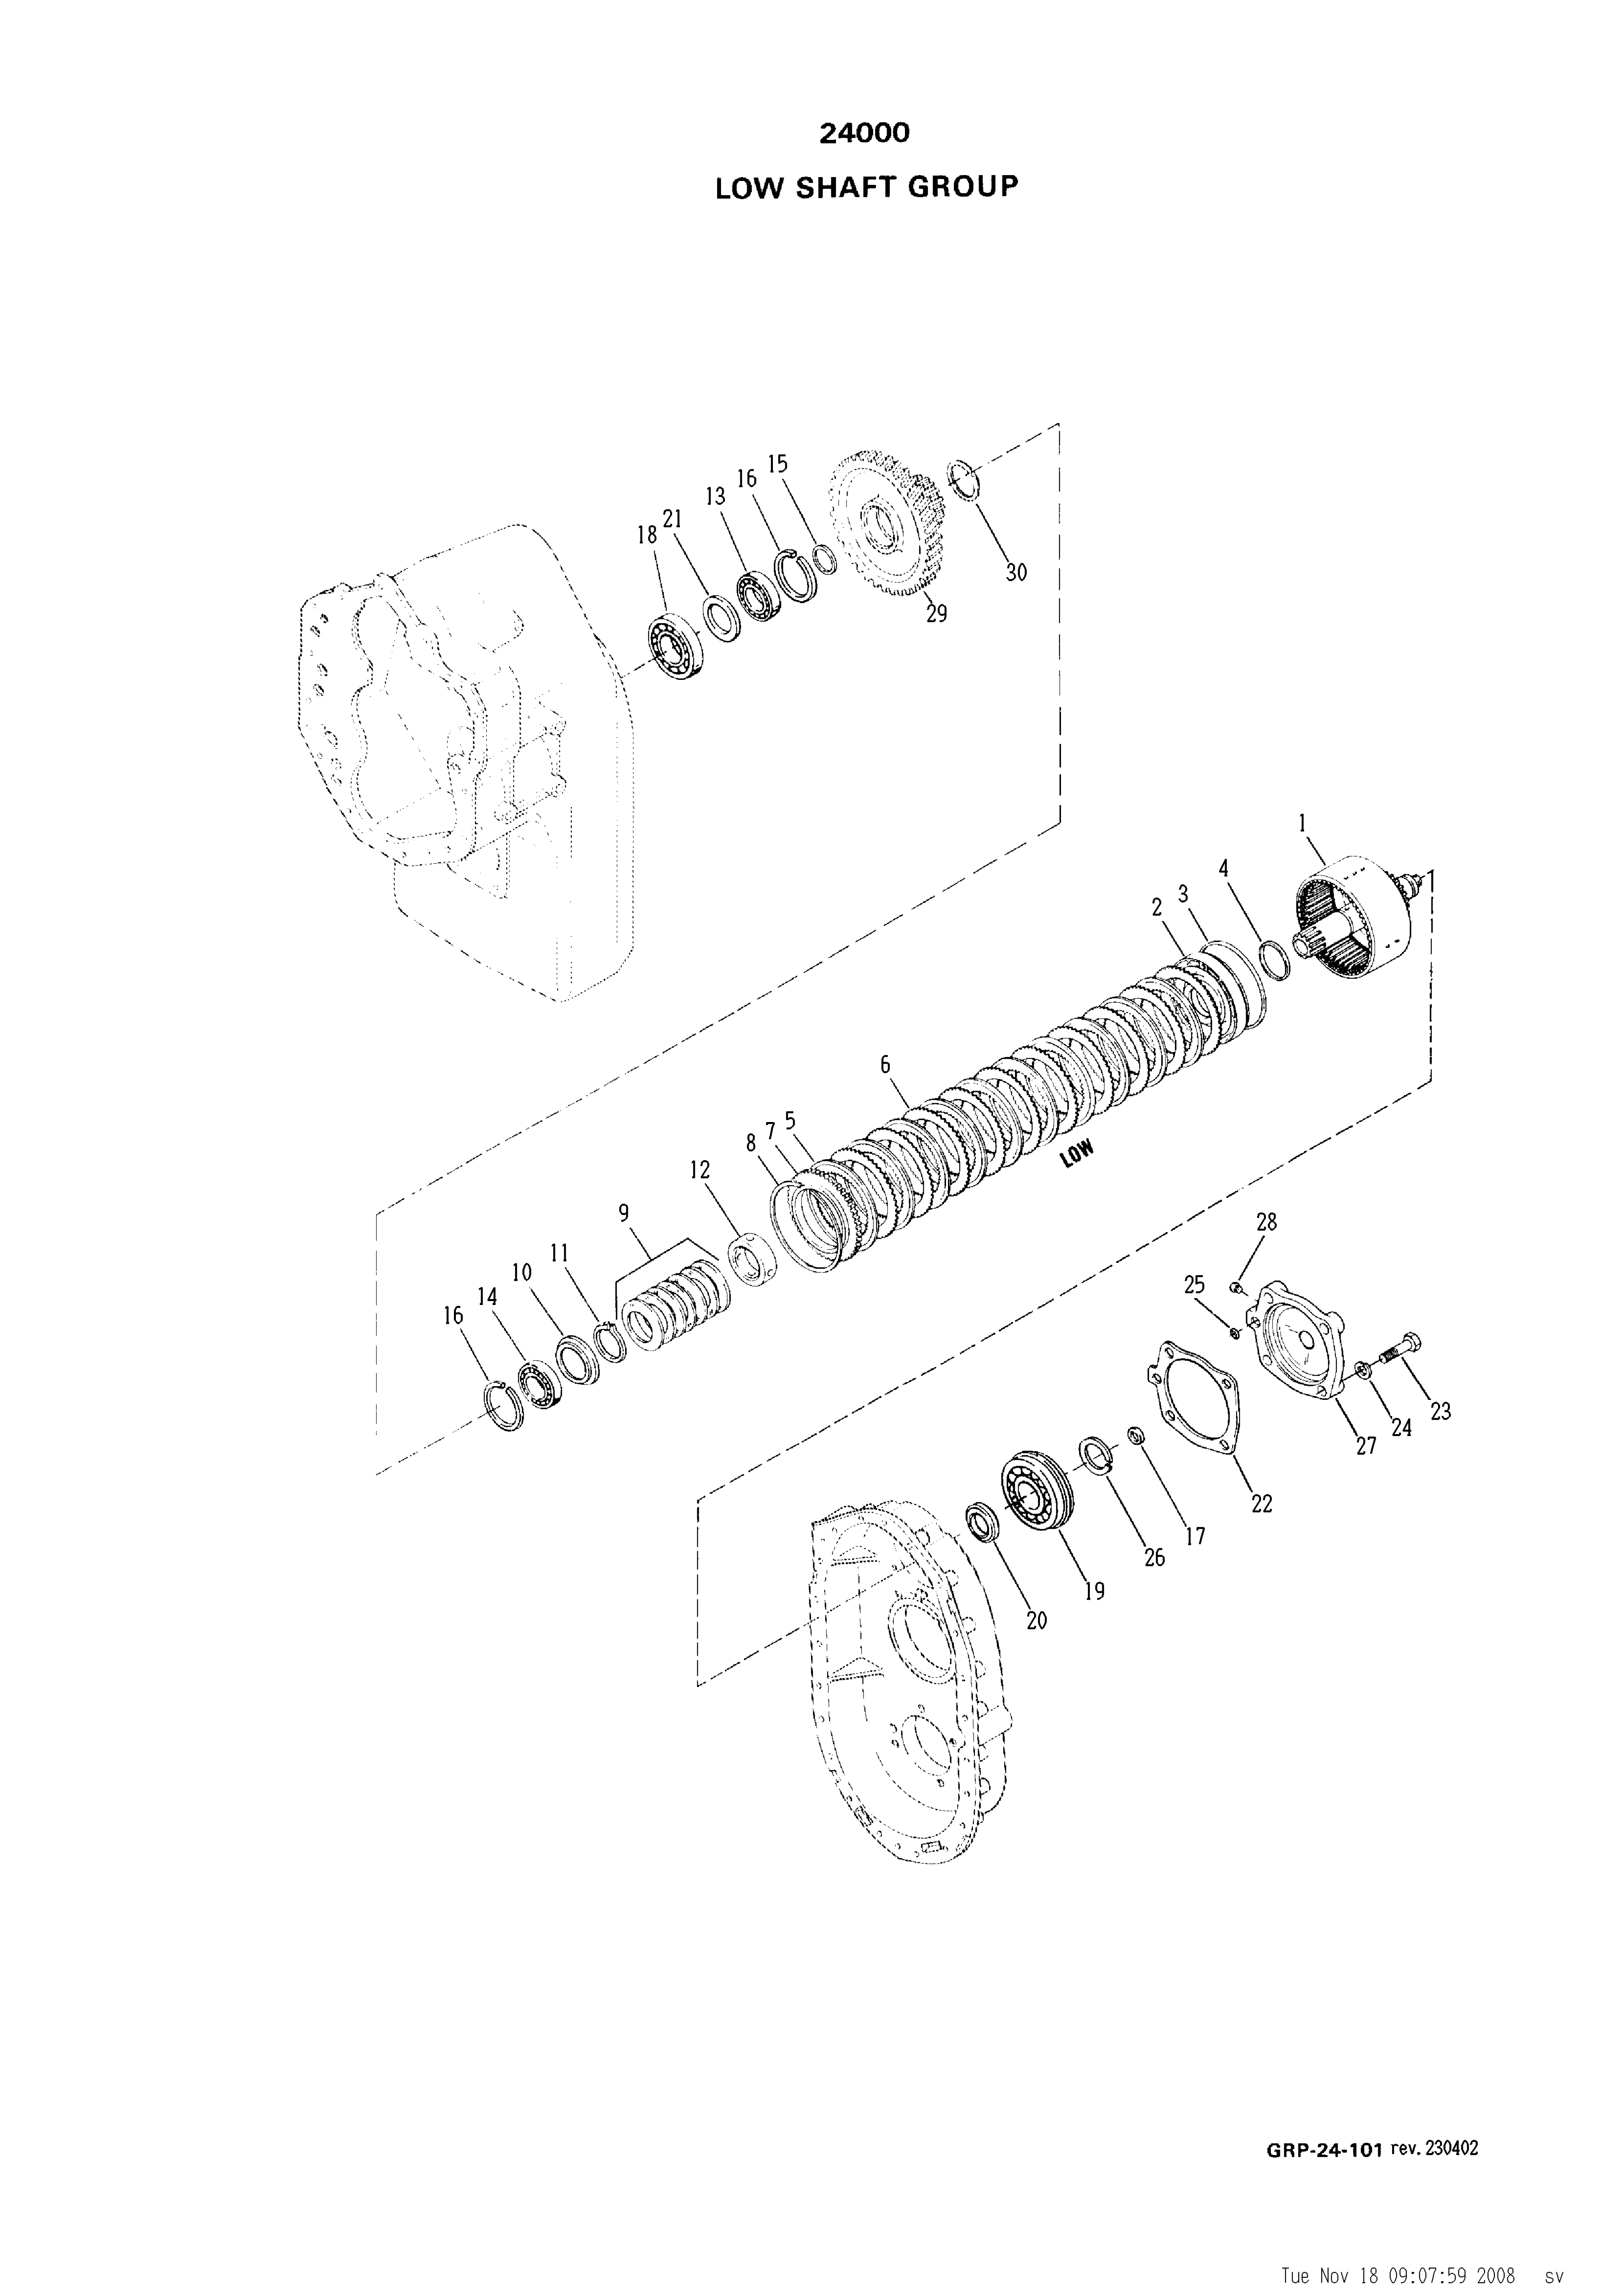 drawing for VALLEE CK234336 - DISC (figure 2)